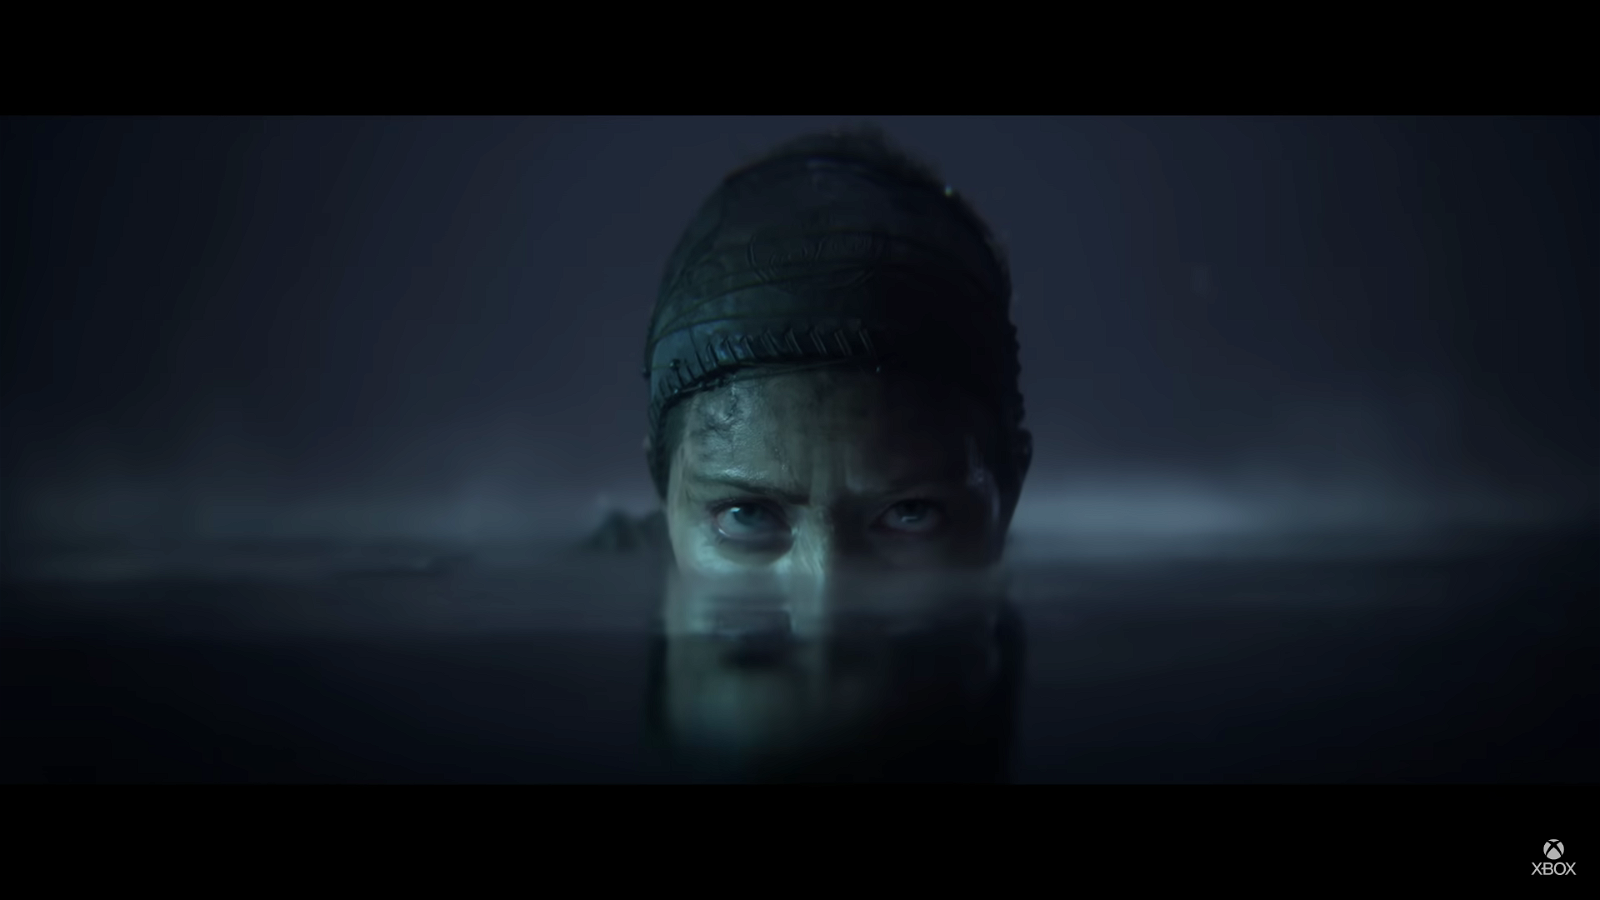 Even though Hellblade: Senua's Sacrifice had a VR mode, its sequel will not.